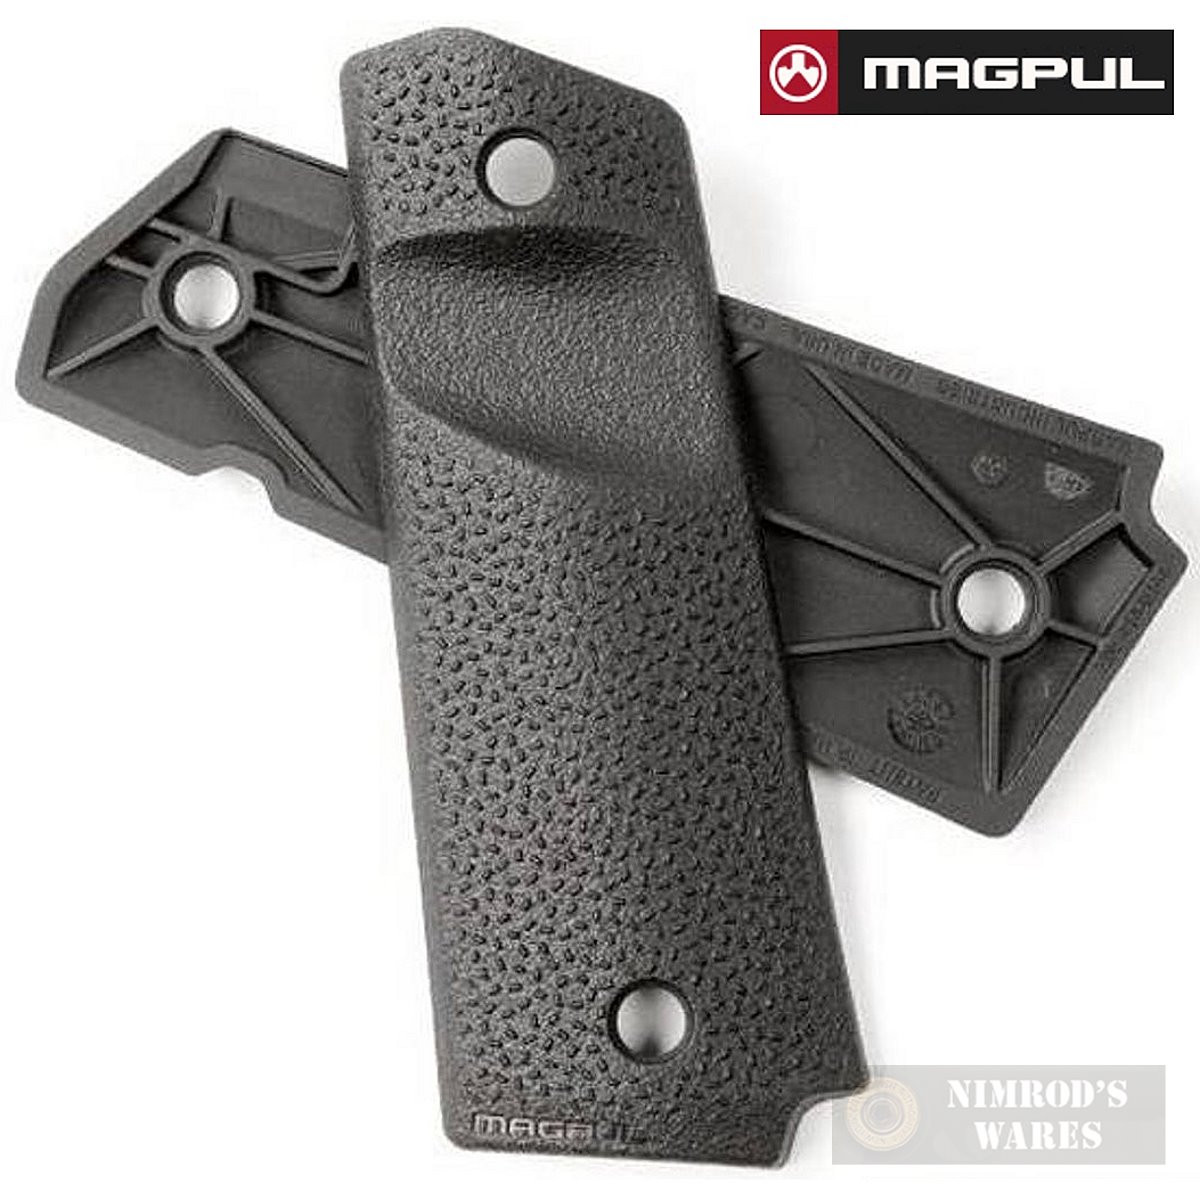 MAGPUL 1911 Grip Panels with TSP Texture MAG544-ODG 